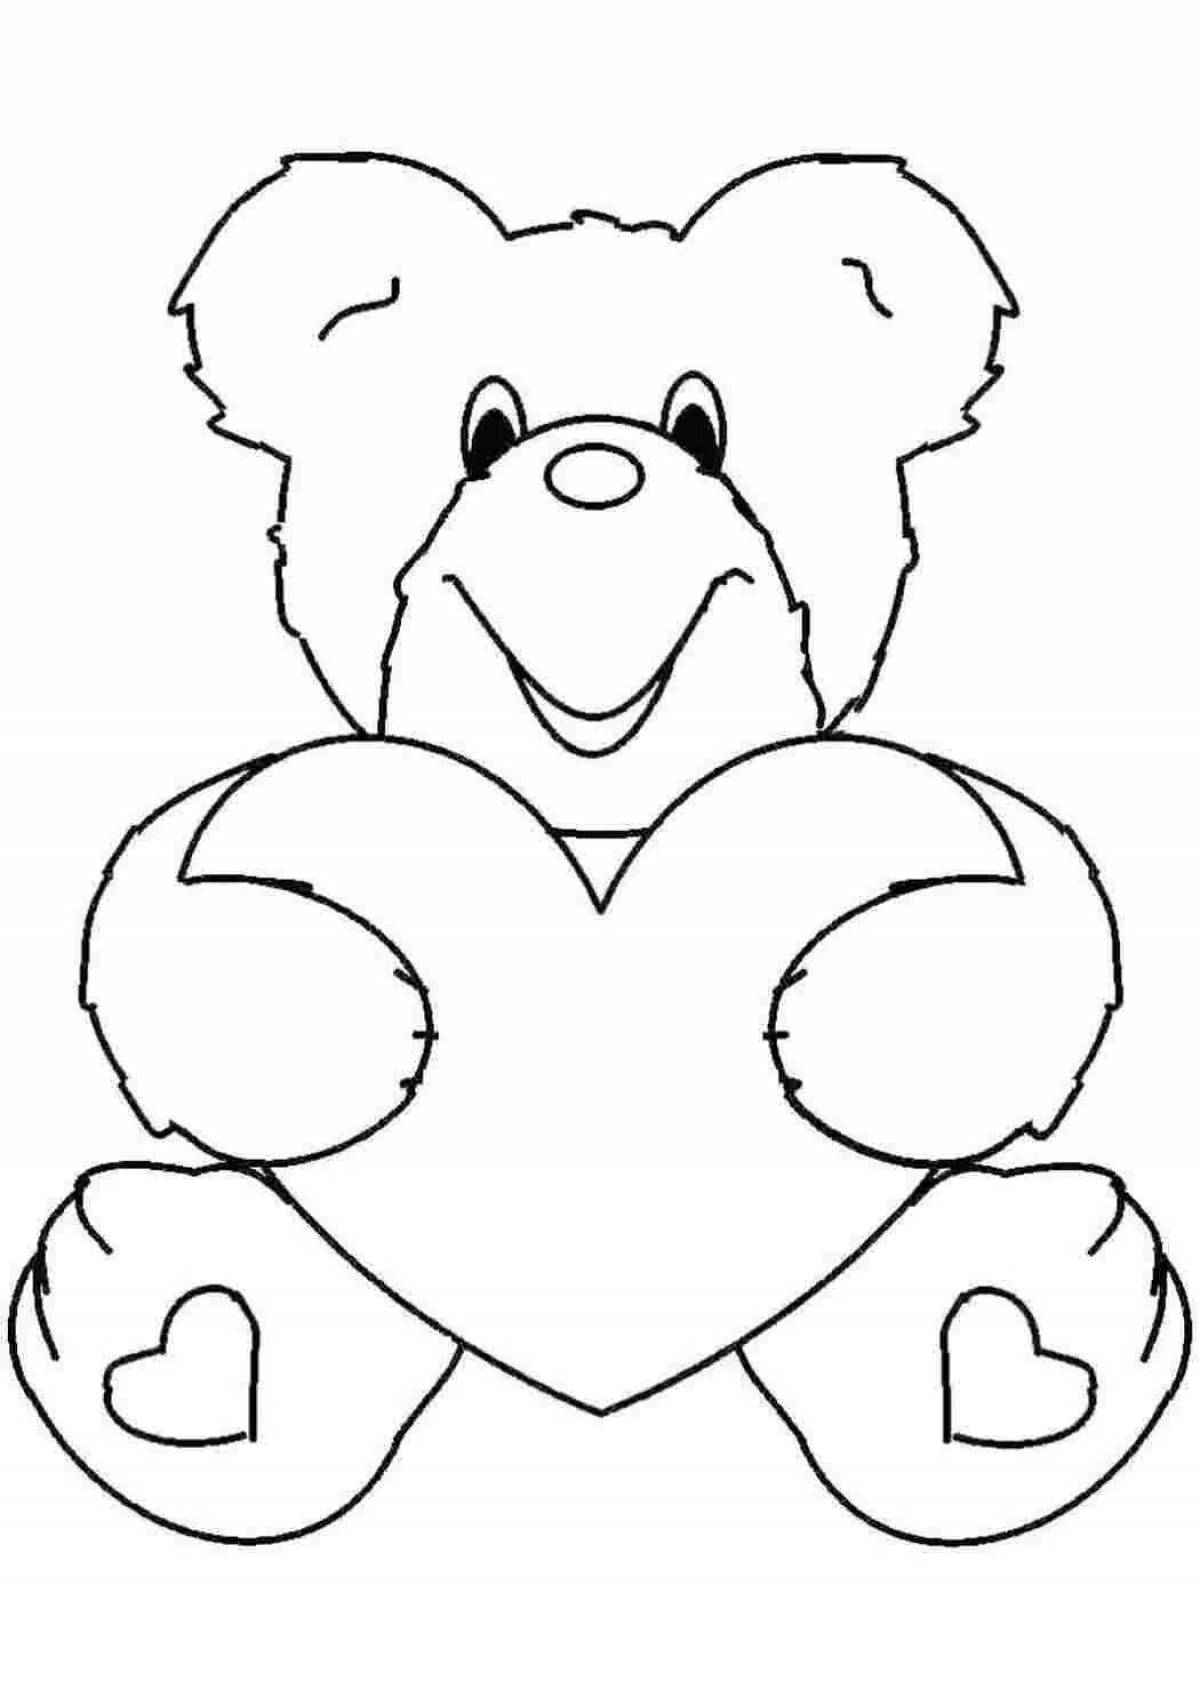 Bright teddy bear with a heart coloring